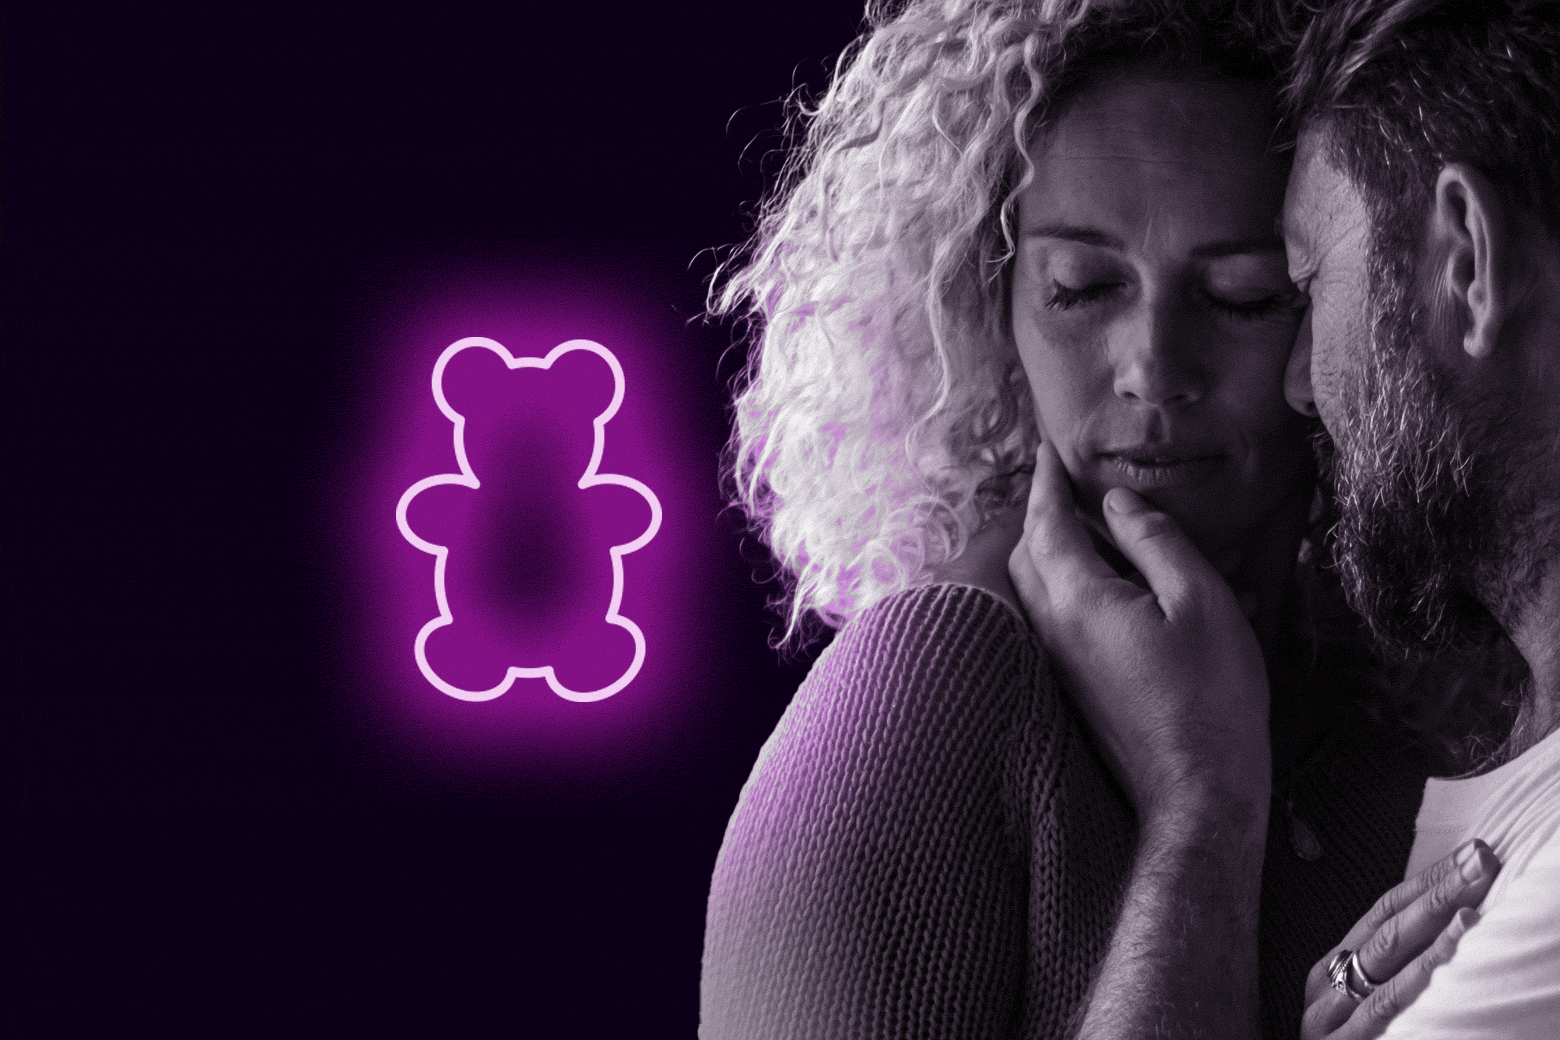 A couple makes out next to a neon edible in the shape of a teddy bear.